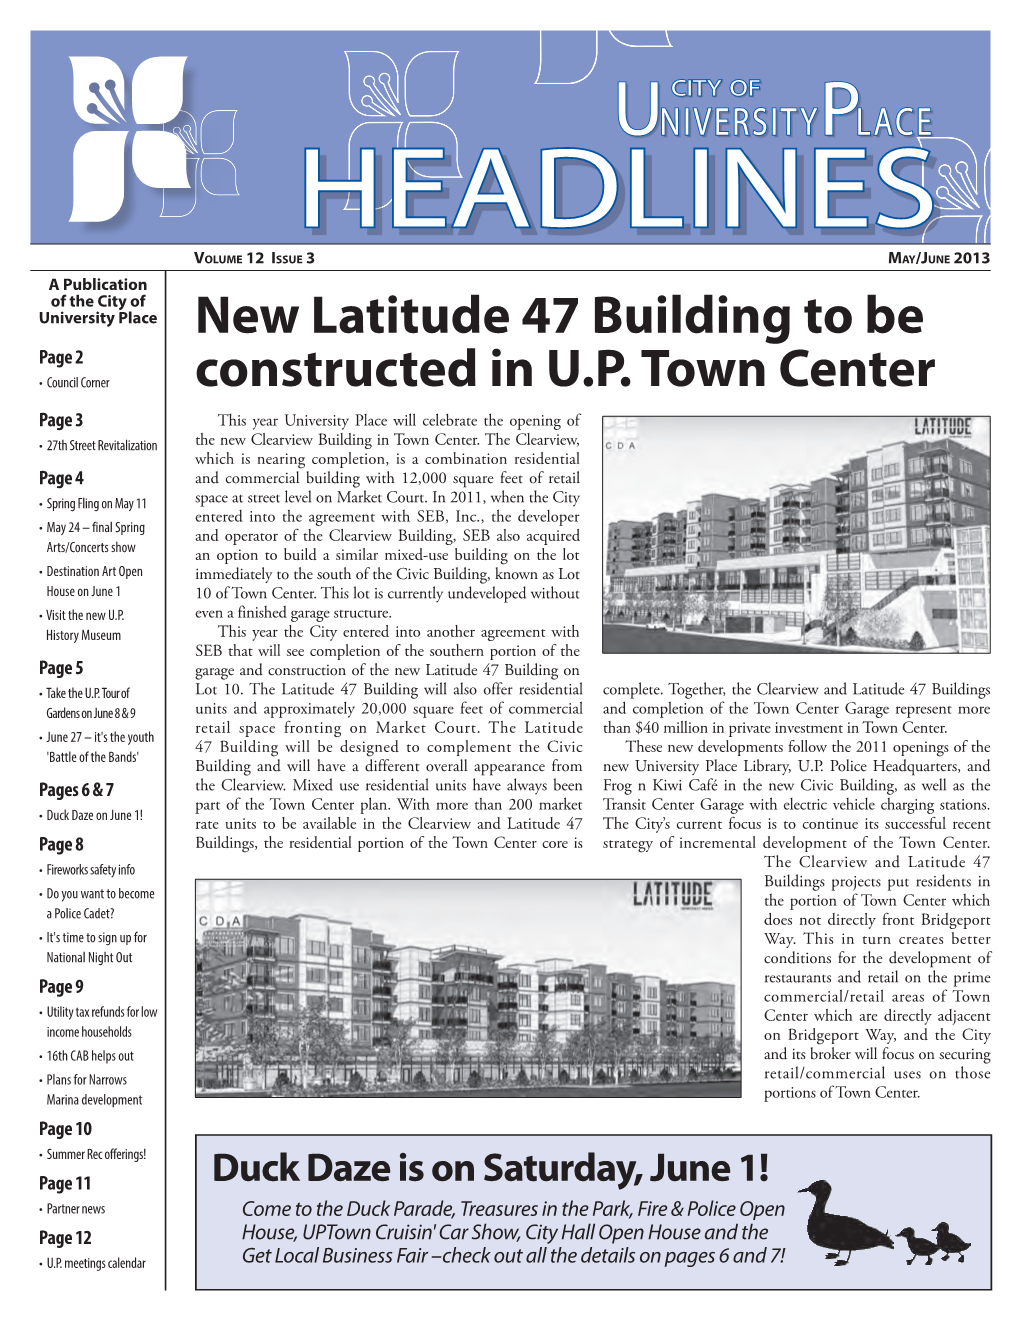 New Latitude 47 Building to Be Constructed in U.P. Town Center